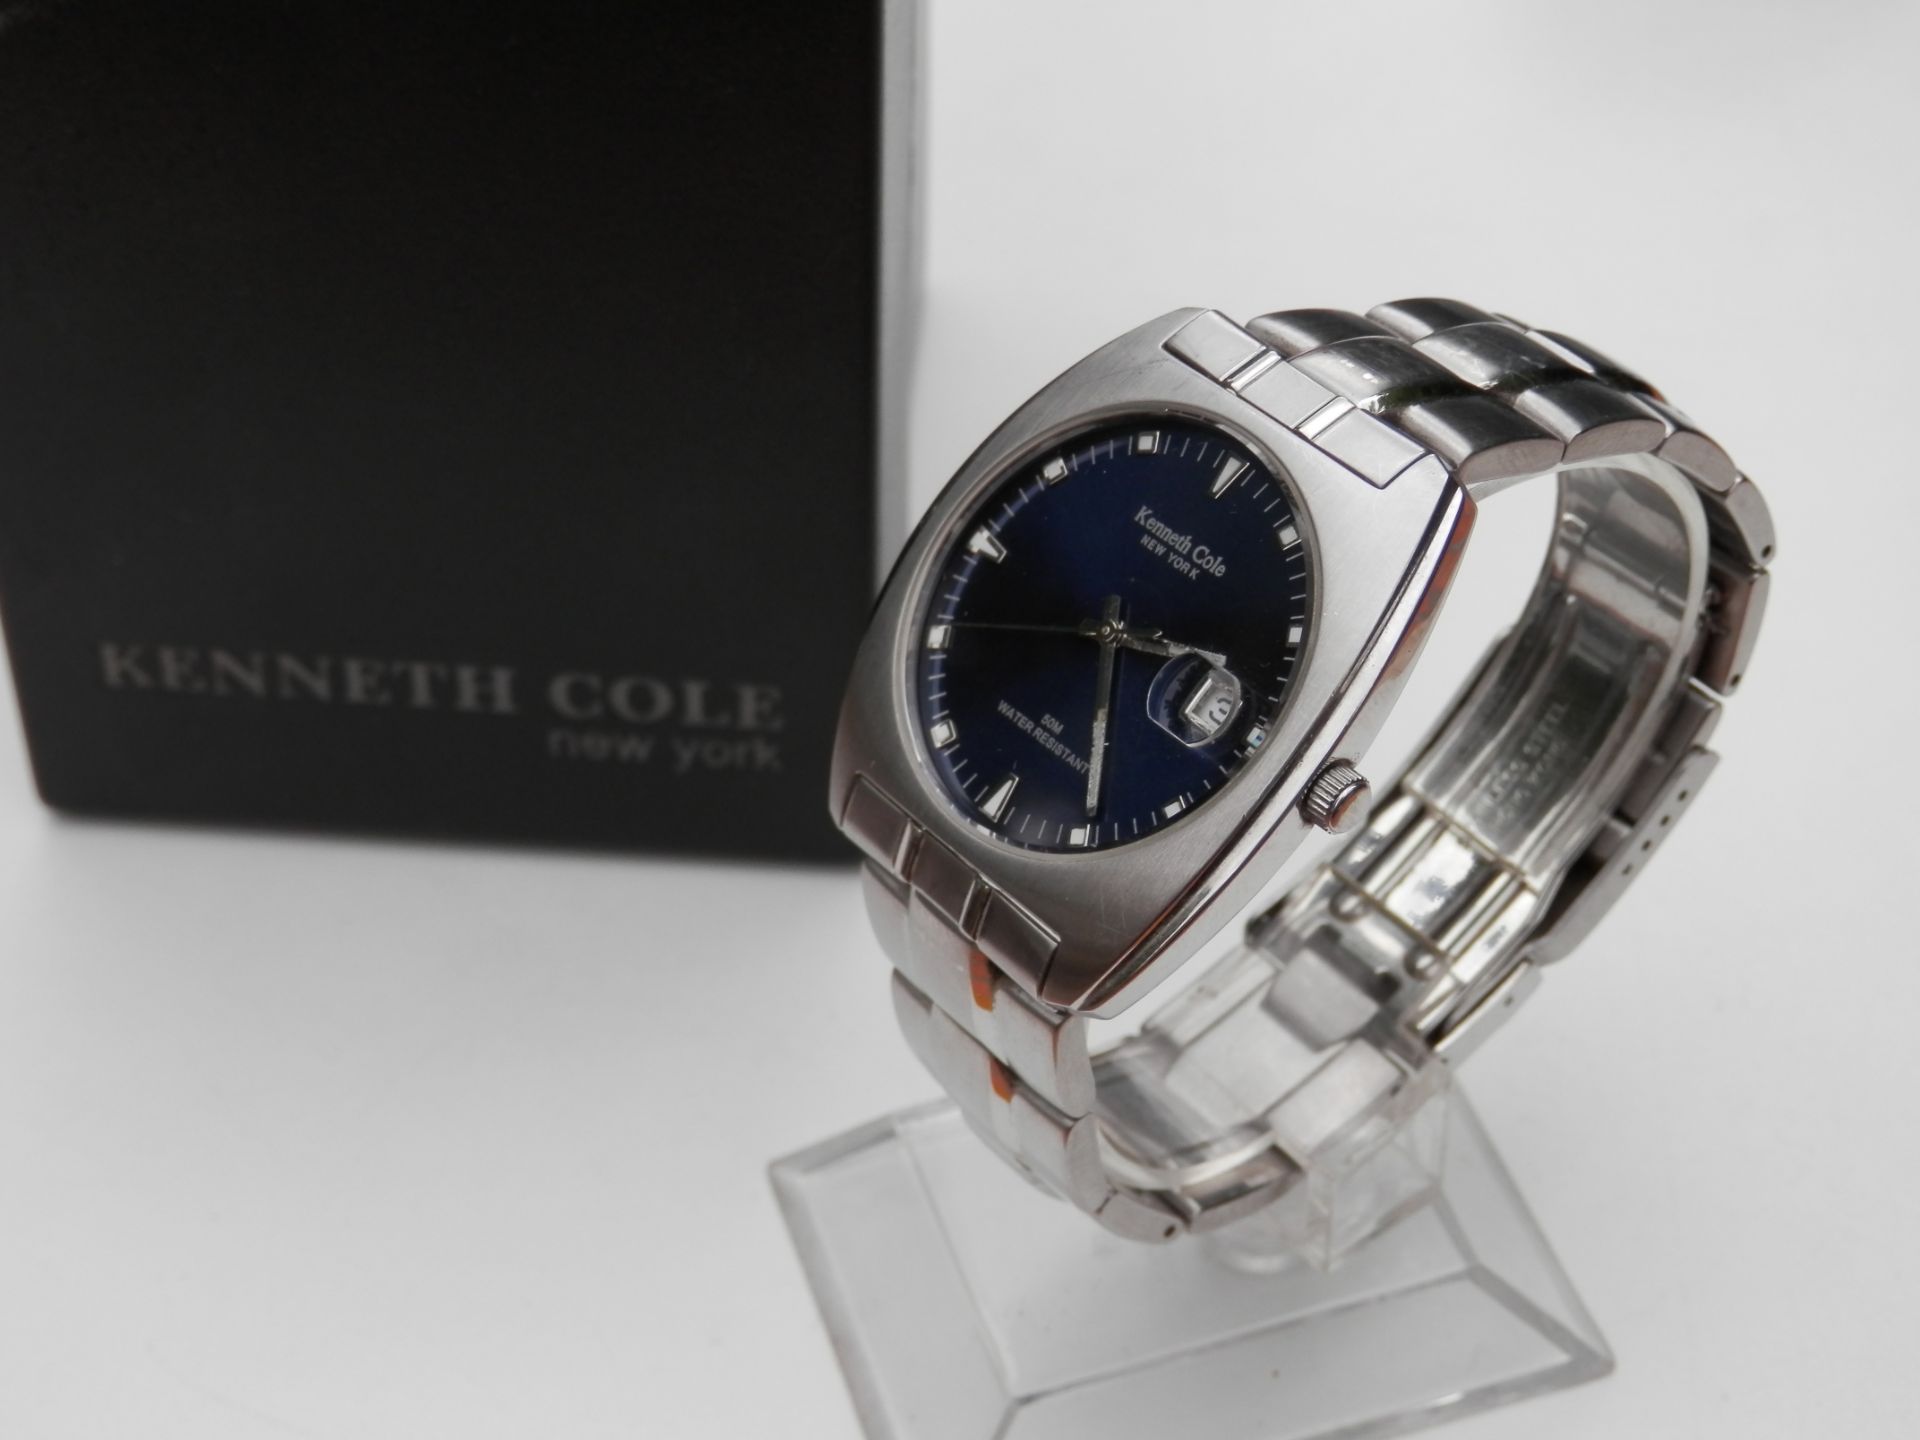 GENTS BOXED KENNETH COLE NEW YORK, FULL STAINLESS 50M WR QUARTZ DATE WATCH, FULLY WORKING. RRP $125 - Image 4 of 11